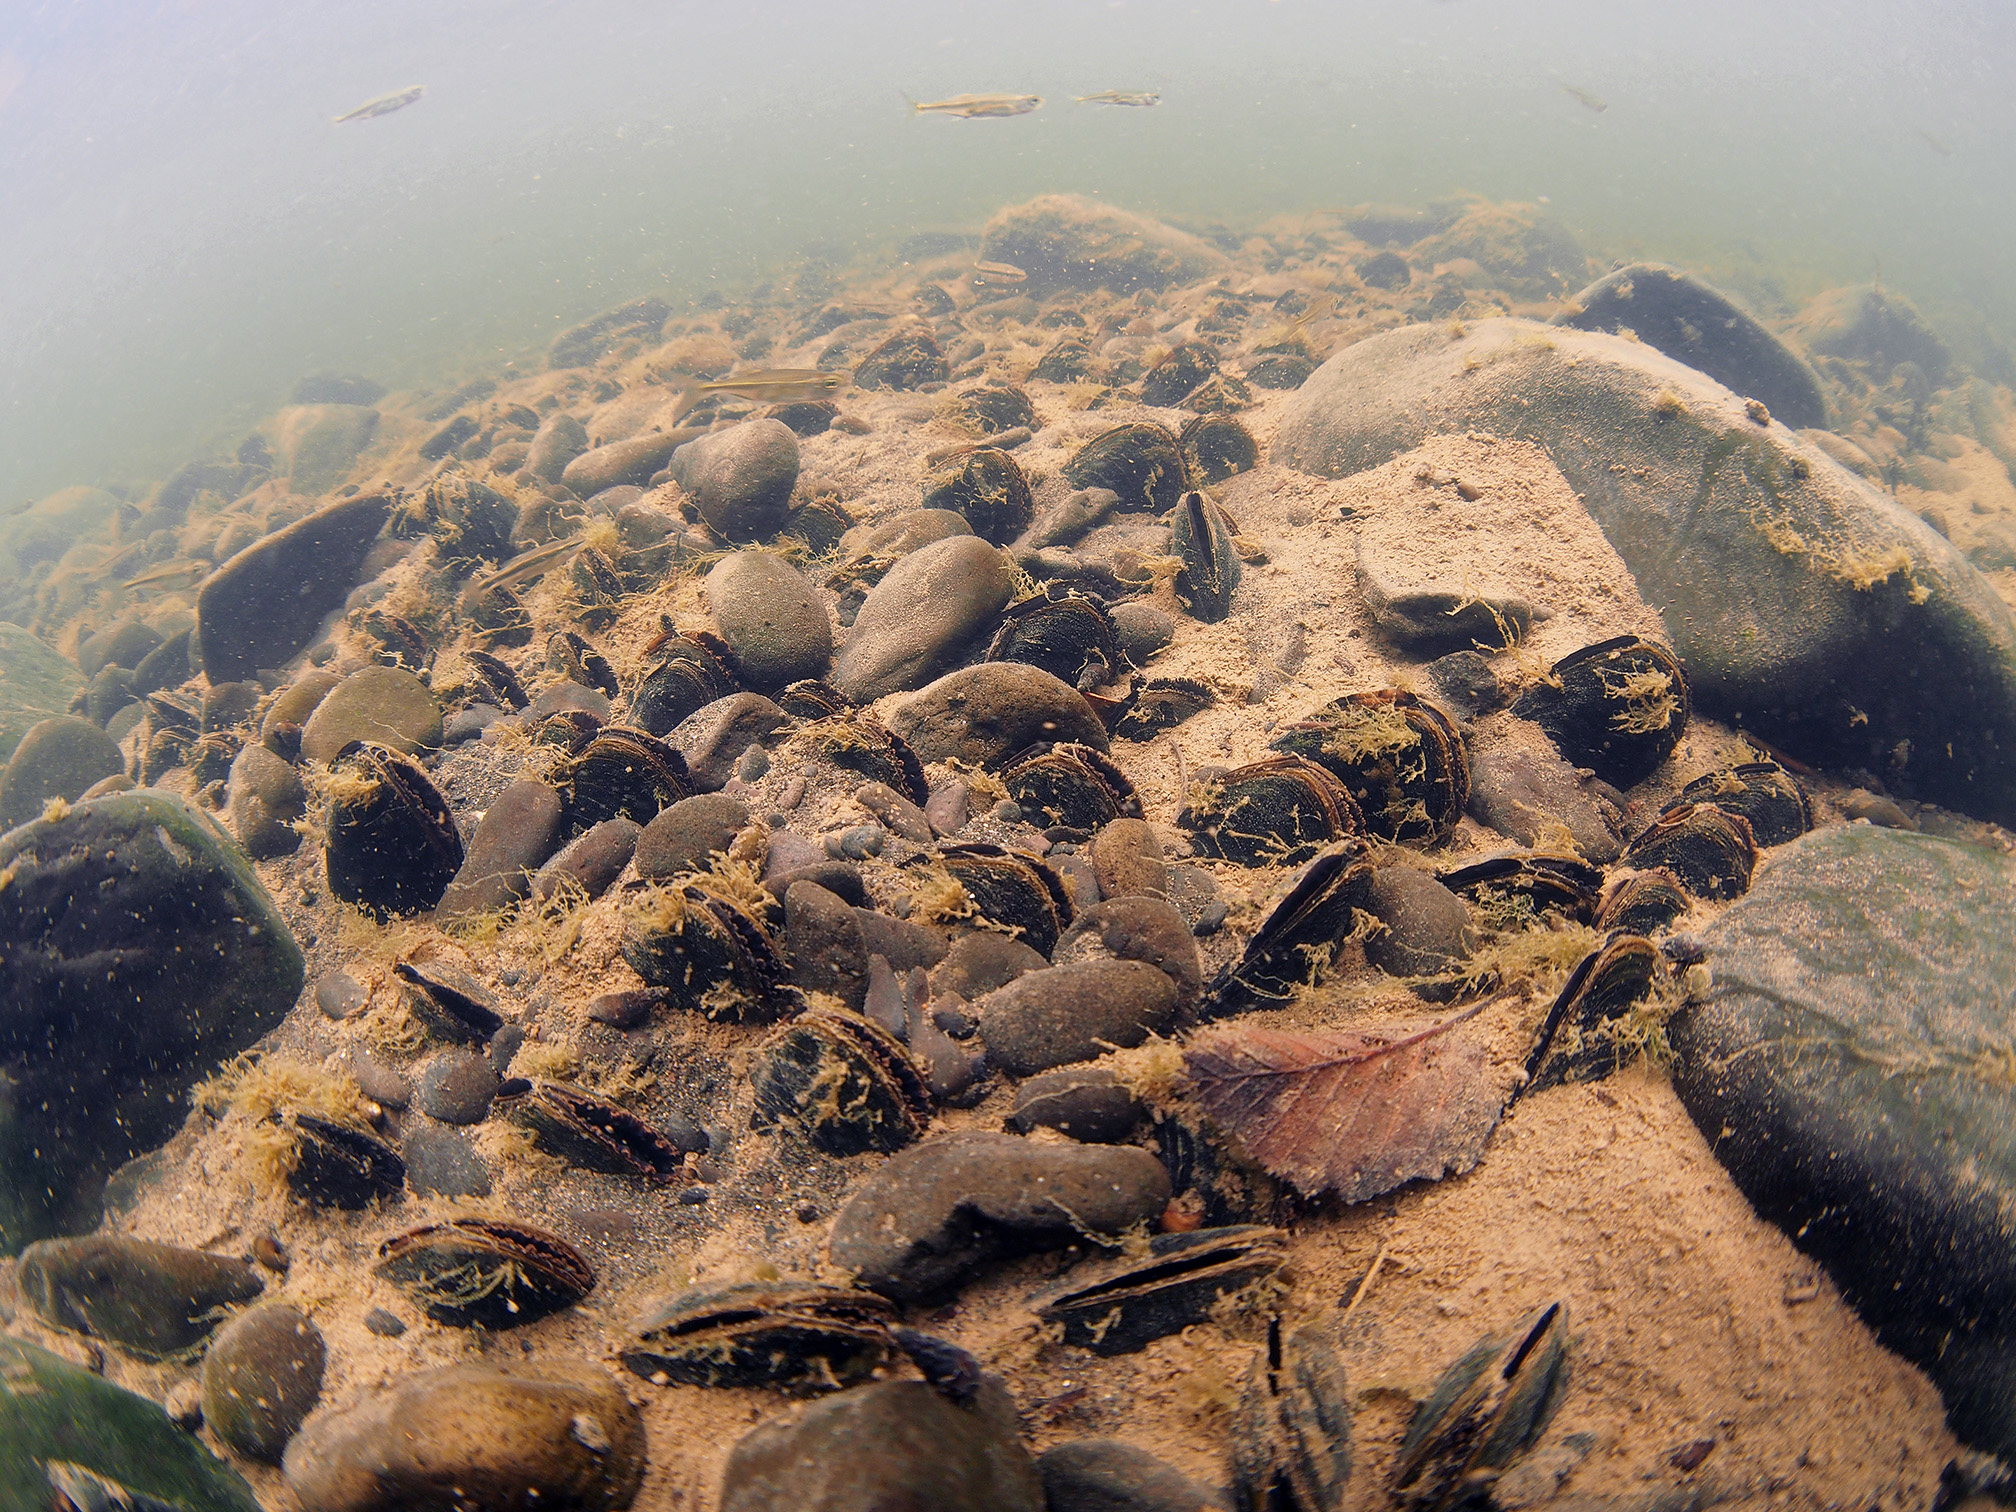 An underwater photo showing the bottom of a river and above it in the hazy water small brown fish. The river bottom is made of dark, rounded rocks, some large, some small, surrounded by pale brown sand. In the sand can be seen dozens of freshwater mussels. The mussels are oval shaped and very dark, almost black. The two halves of their shells are slightly open, showing the paler, soft flesh of the animal.